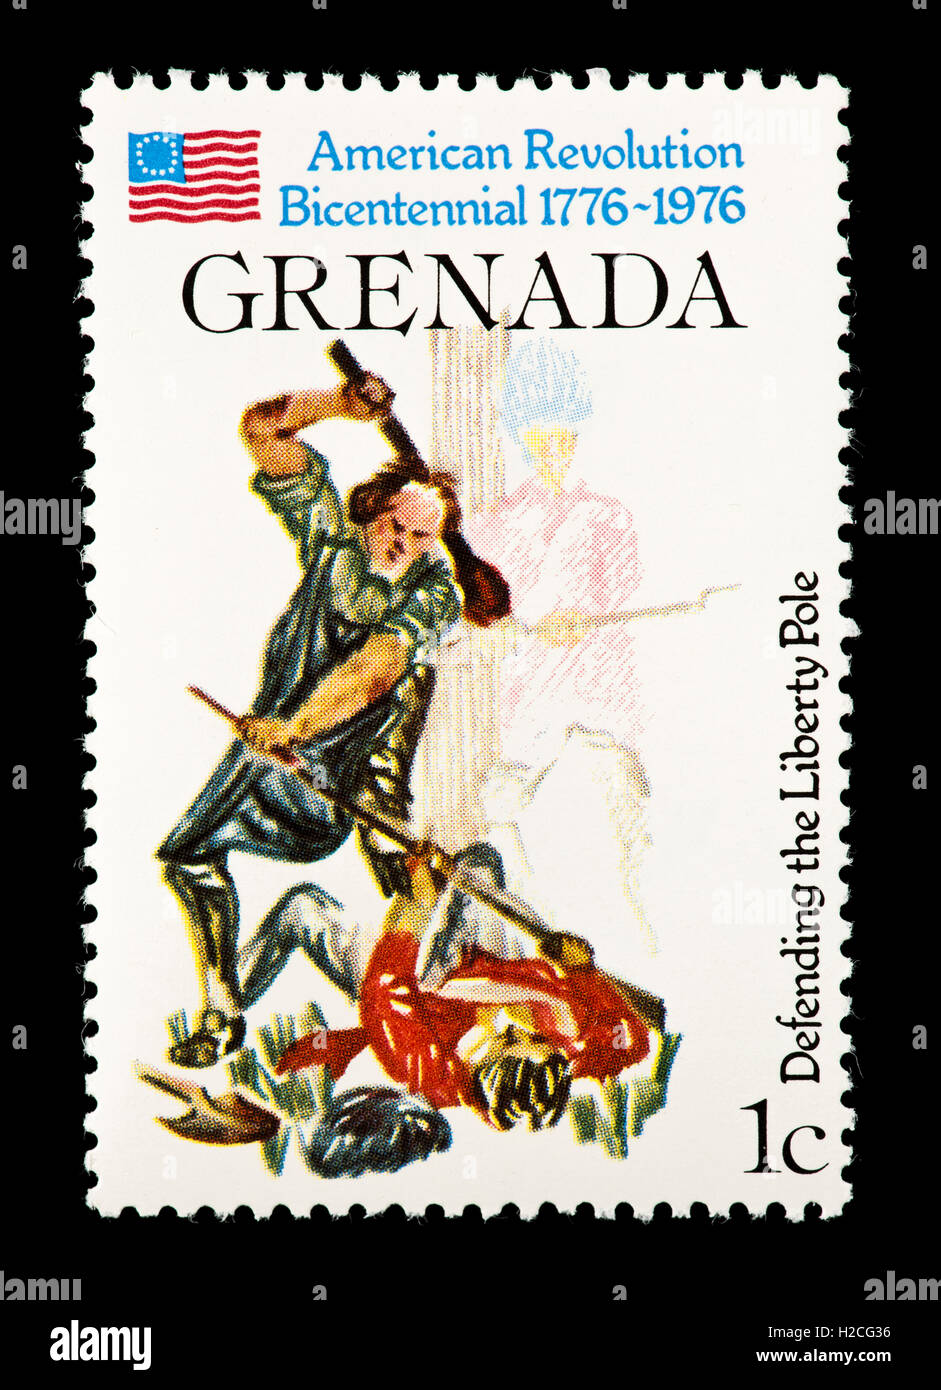 Postage stamp from Grenada depicting the defense of the Liberty Pole, bicentennial of the American Revolution. Stock Photo